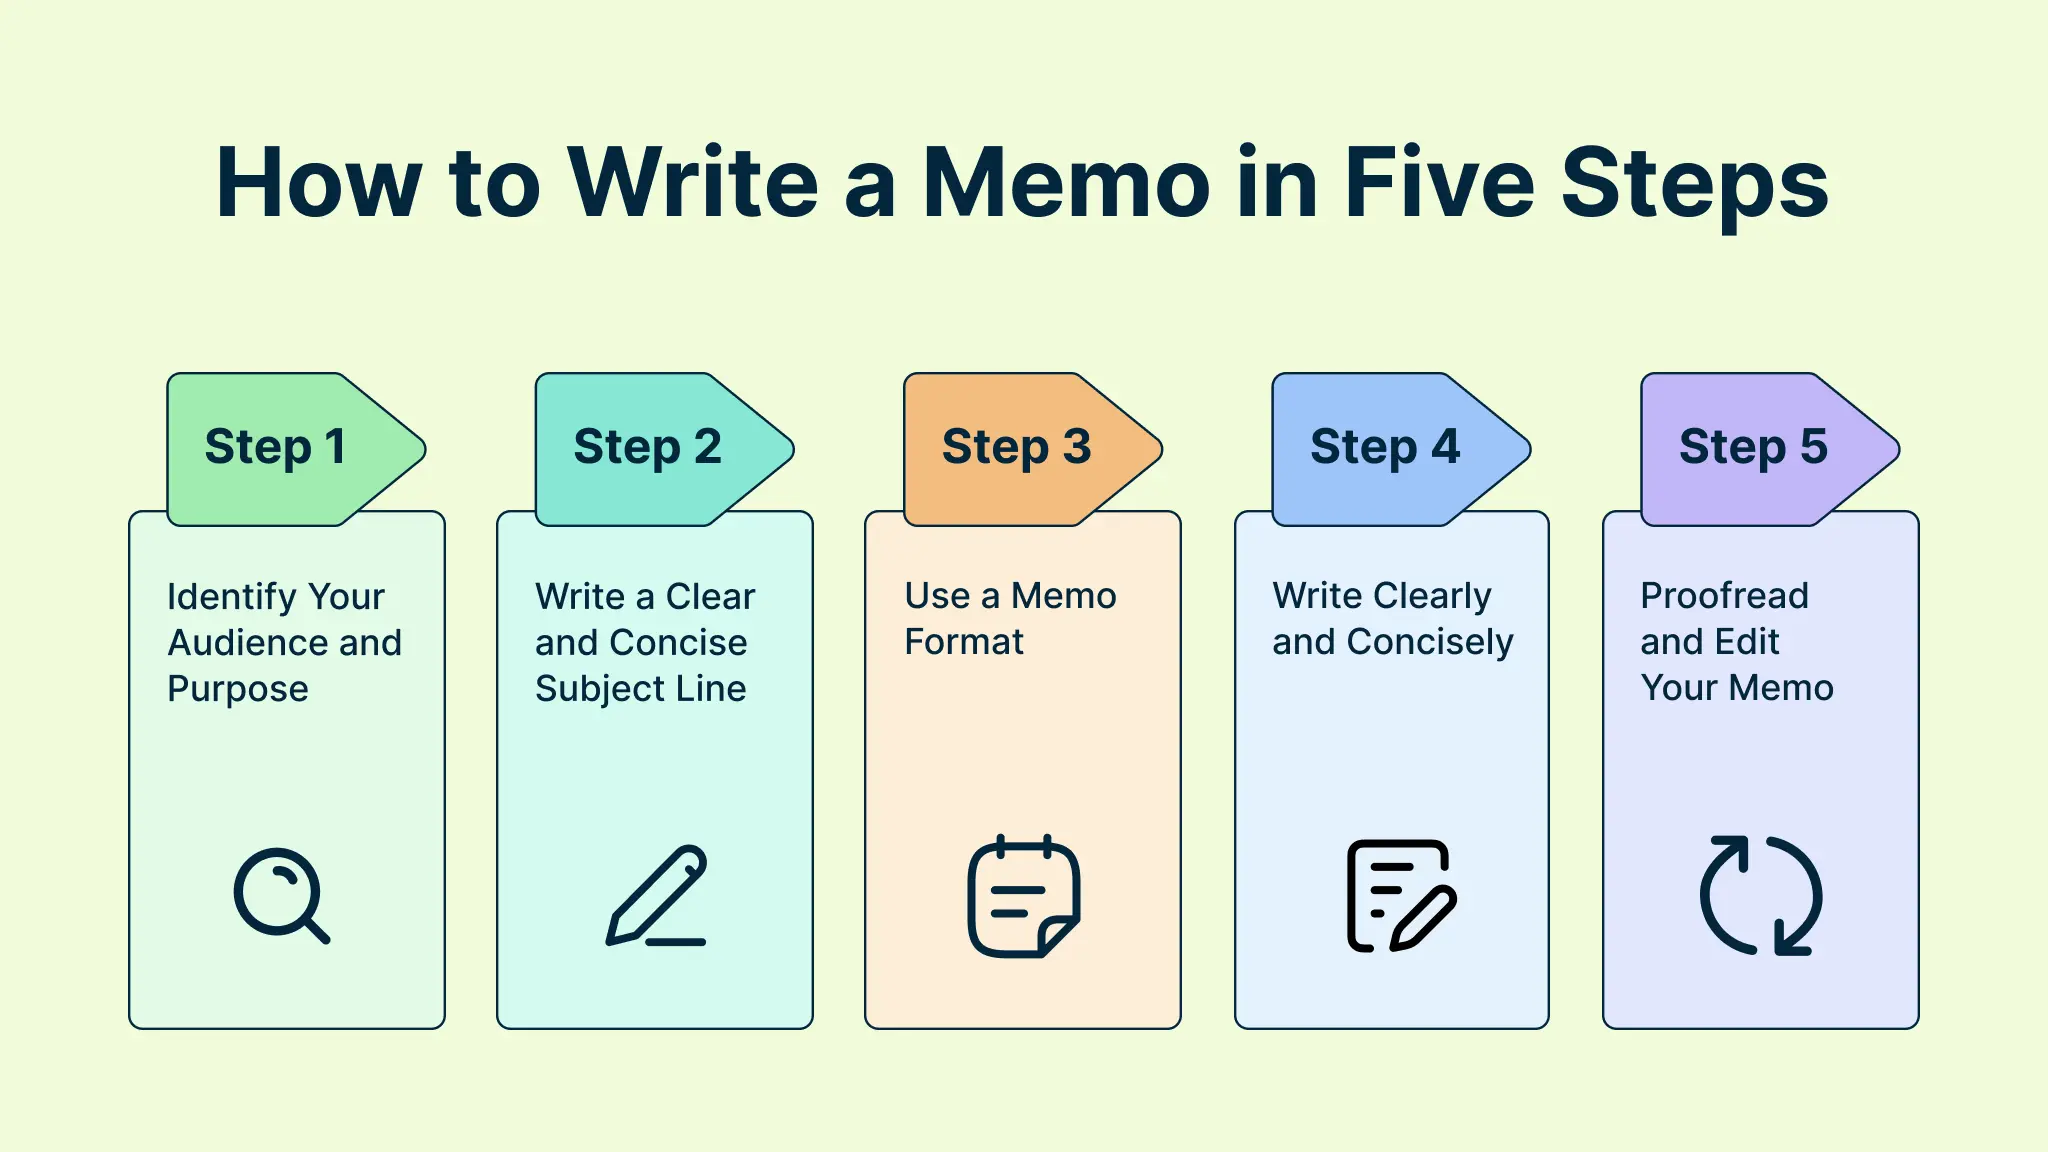 How to write a memo in five steps